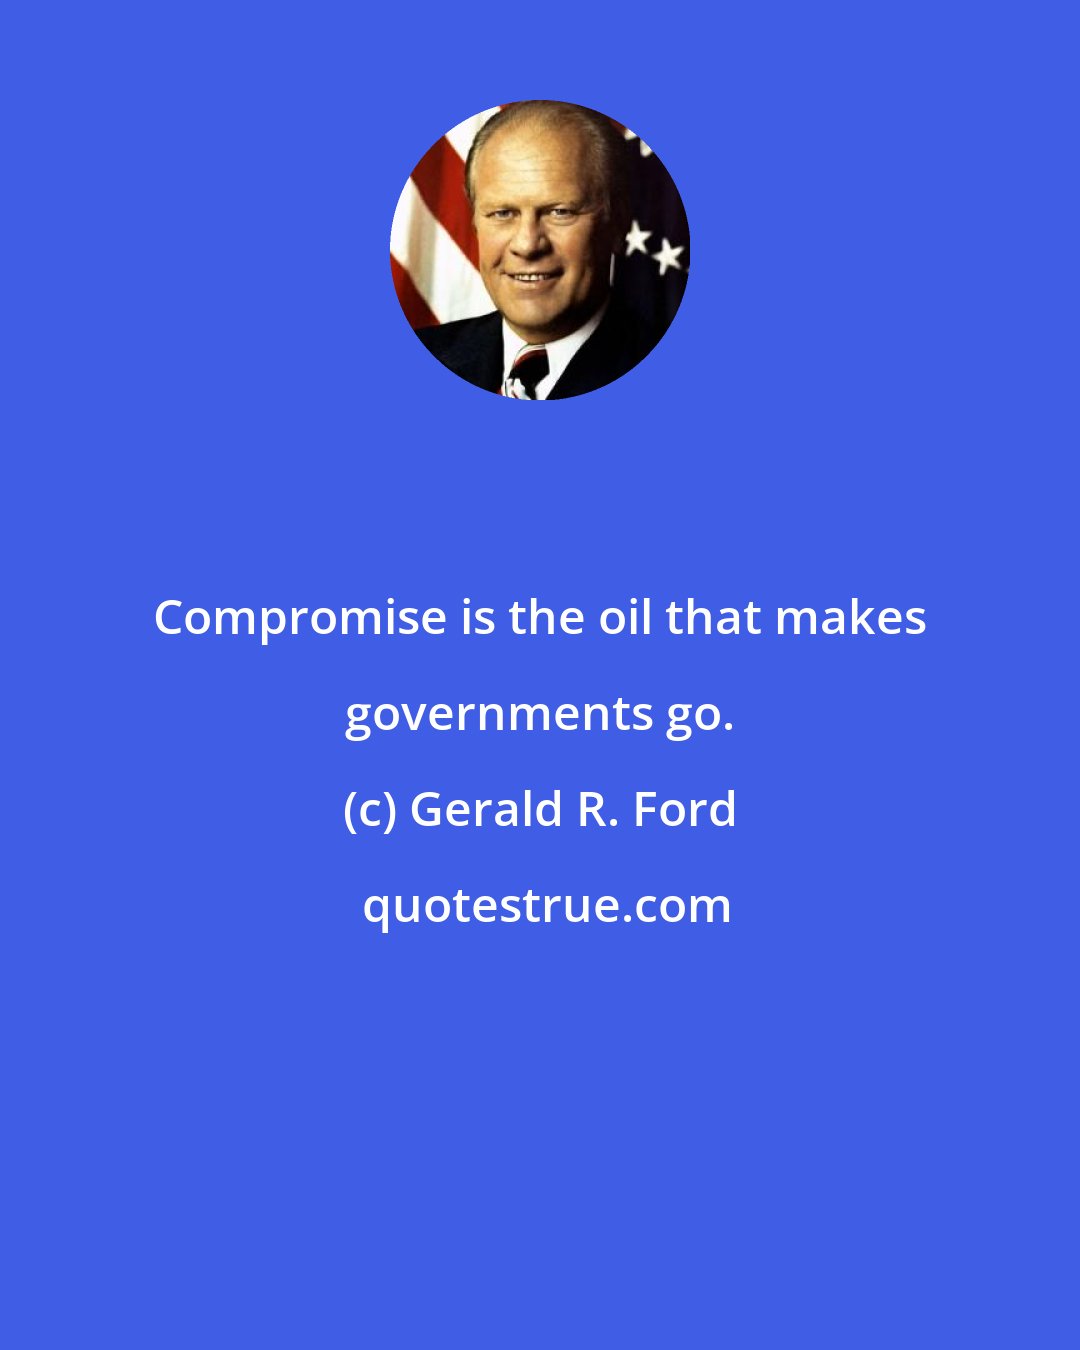 Gerald R. Ford: Compromise is the oil that makes governments go.